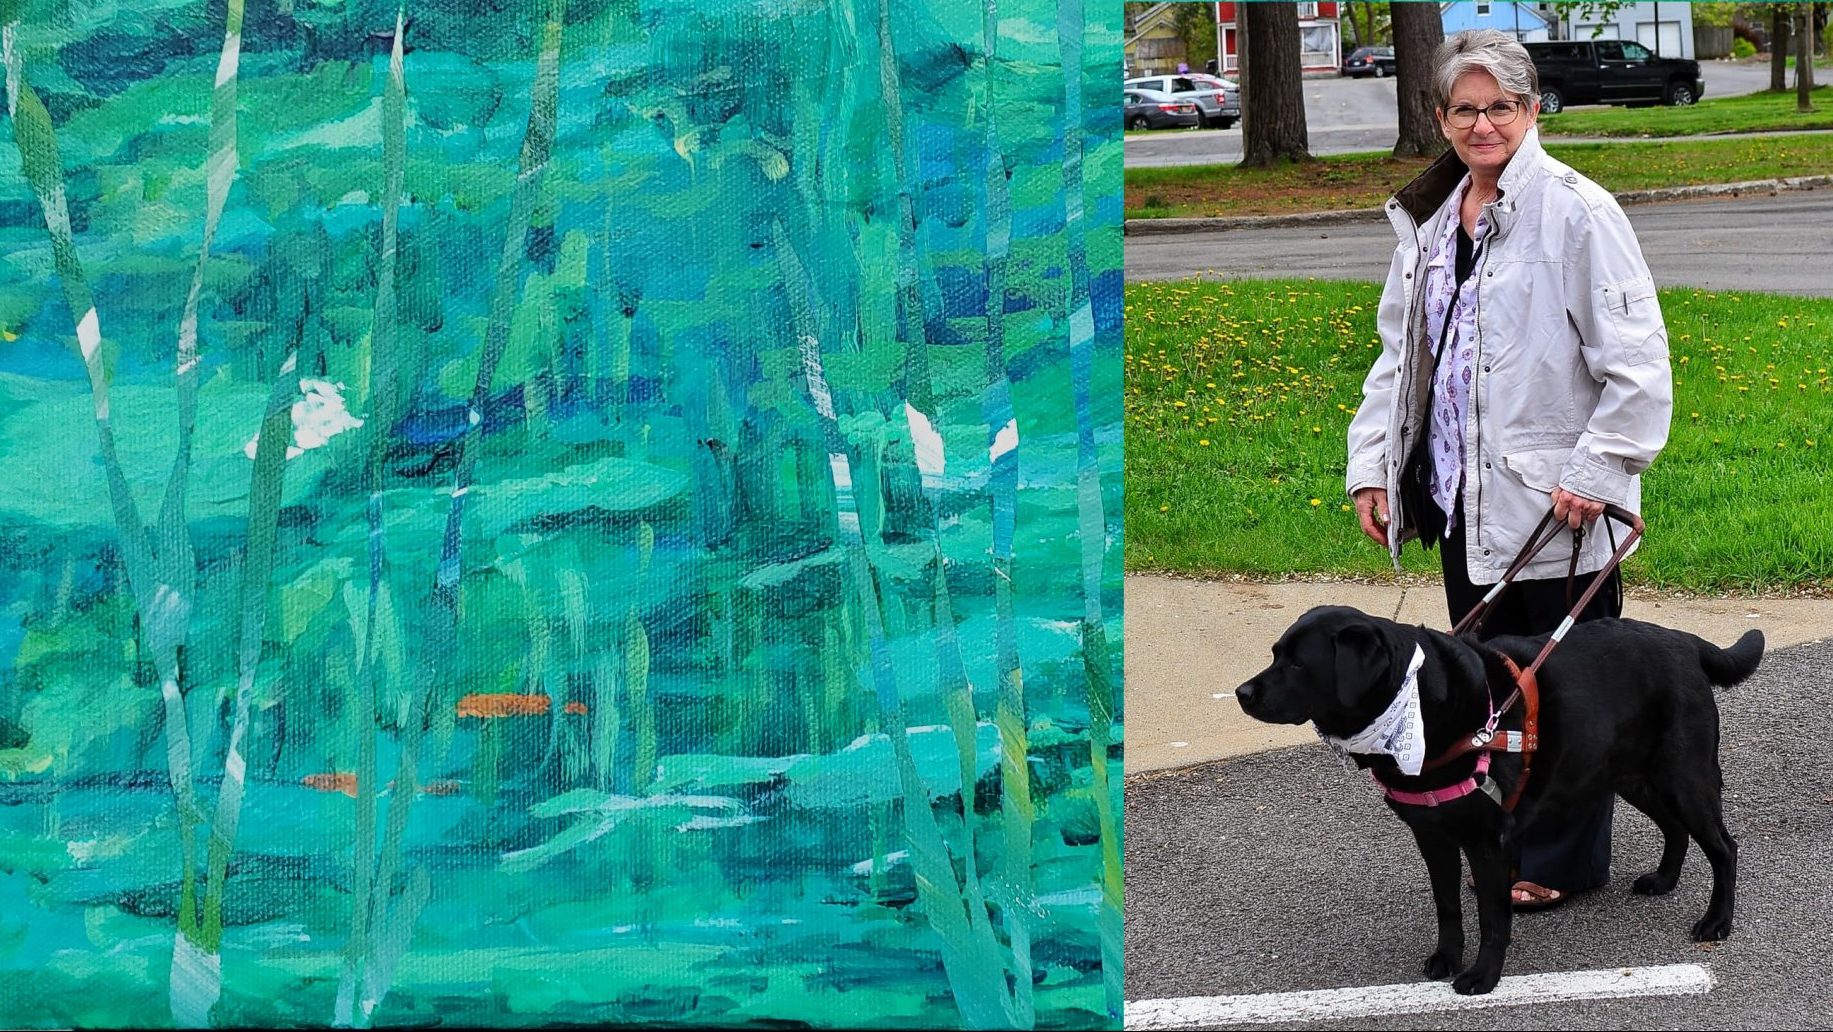 A painting of blue, green, and teal impressionistic painting with small spots of yellow and orange. The strokes are evocative of water. An image to the right shows a woman and her black lab guide dog walking outside near green grass and trees.